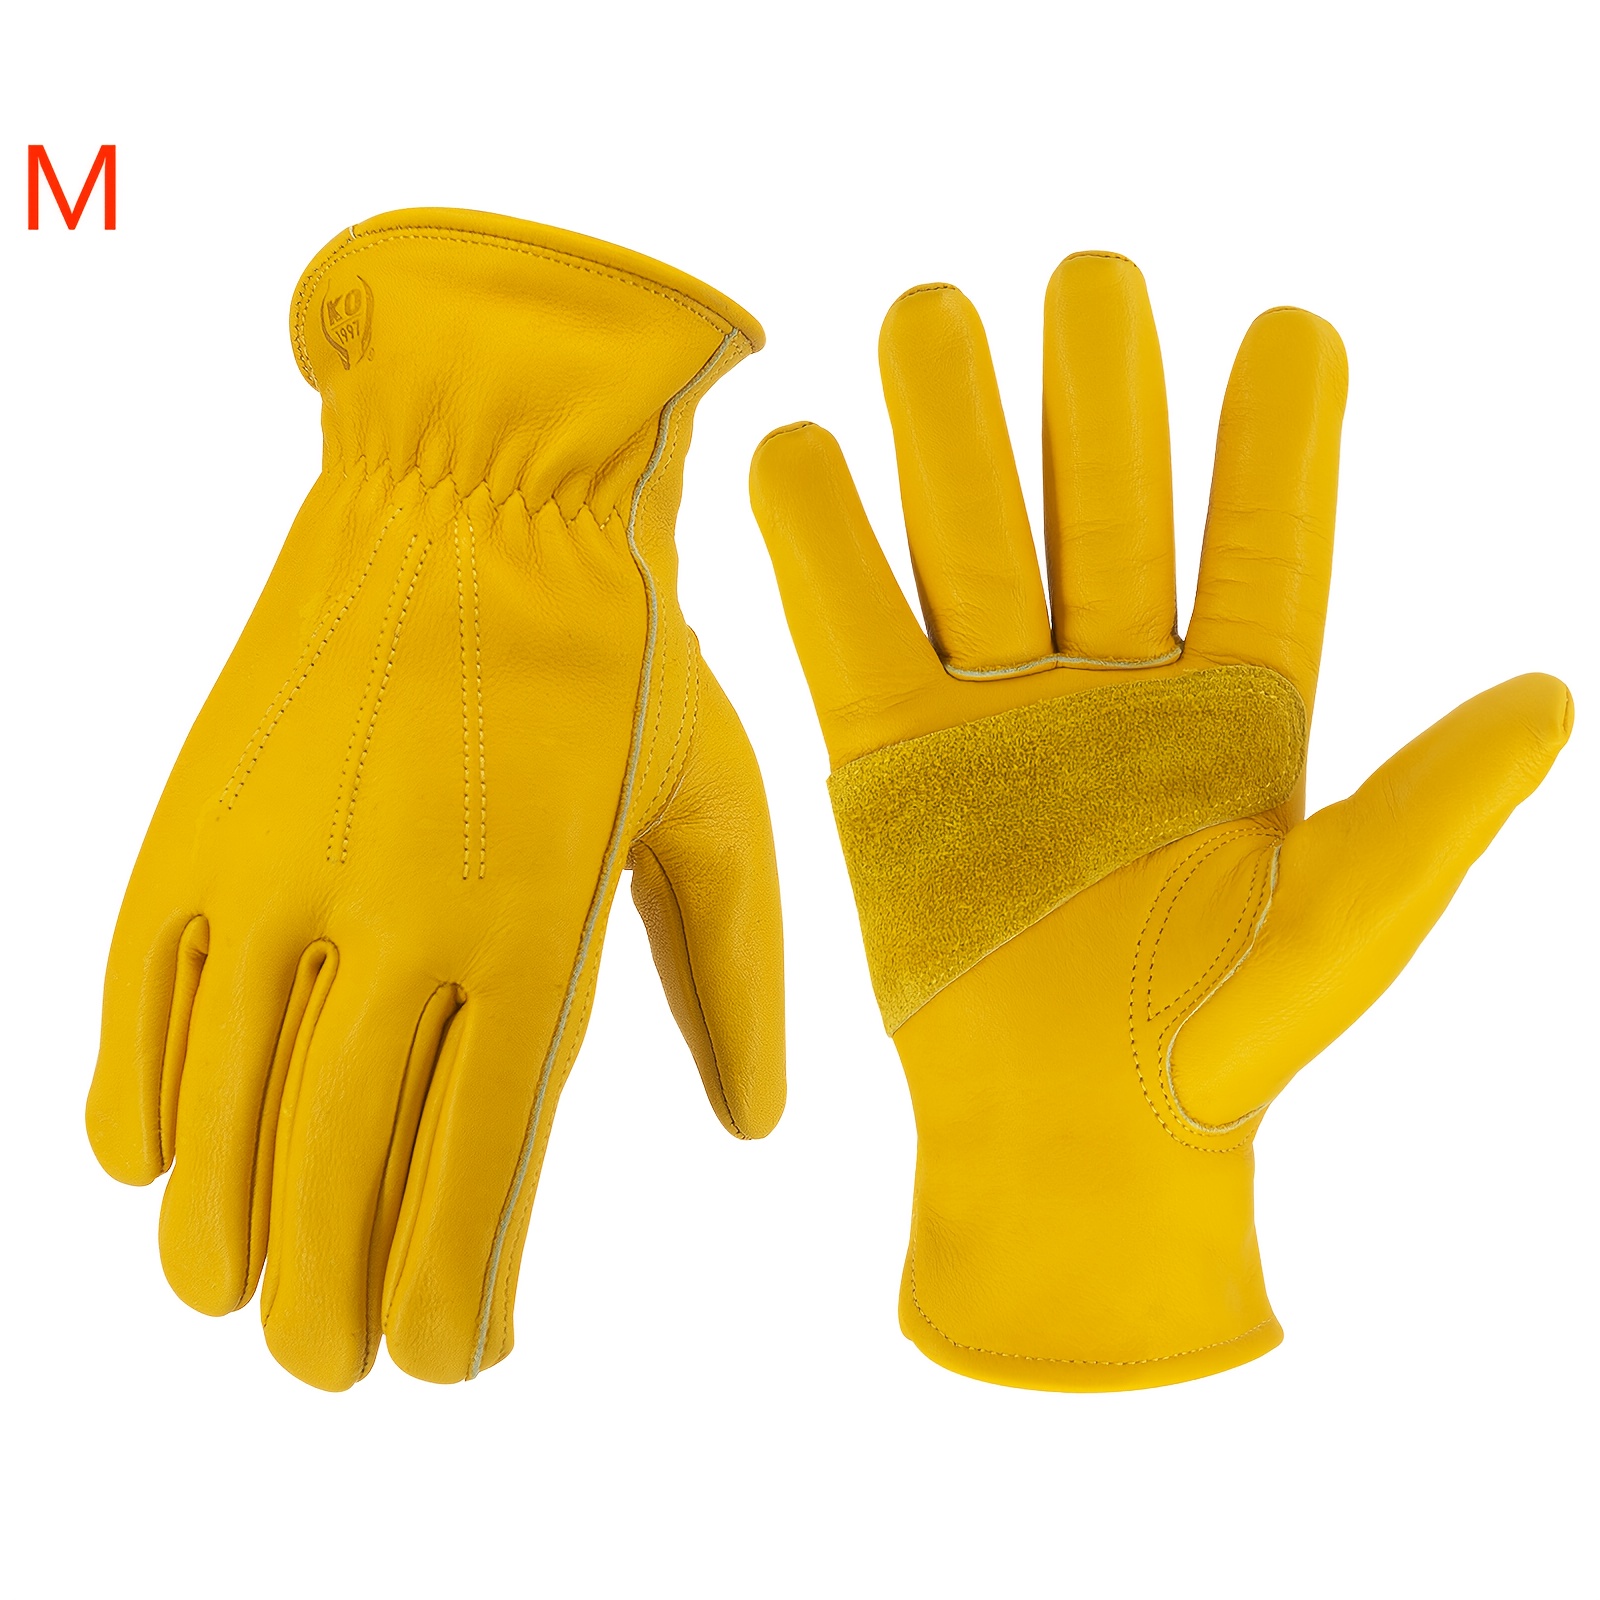 HANDSOME PROTECTION Leather Work Gloves Cowhide Gardening Glove for  Driving/Wood Cutting/Construction/Garden for Men and Women 1 Pair(Small) …